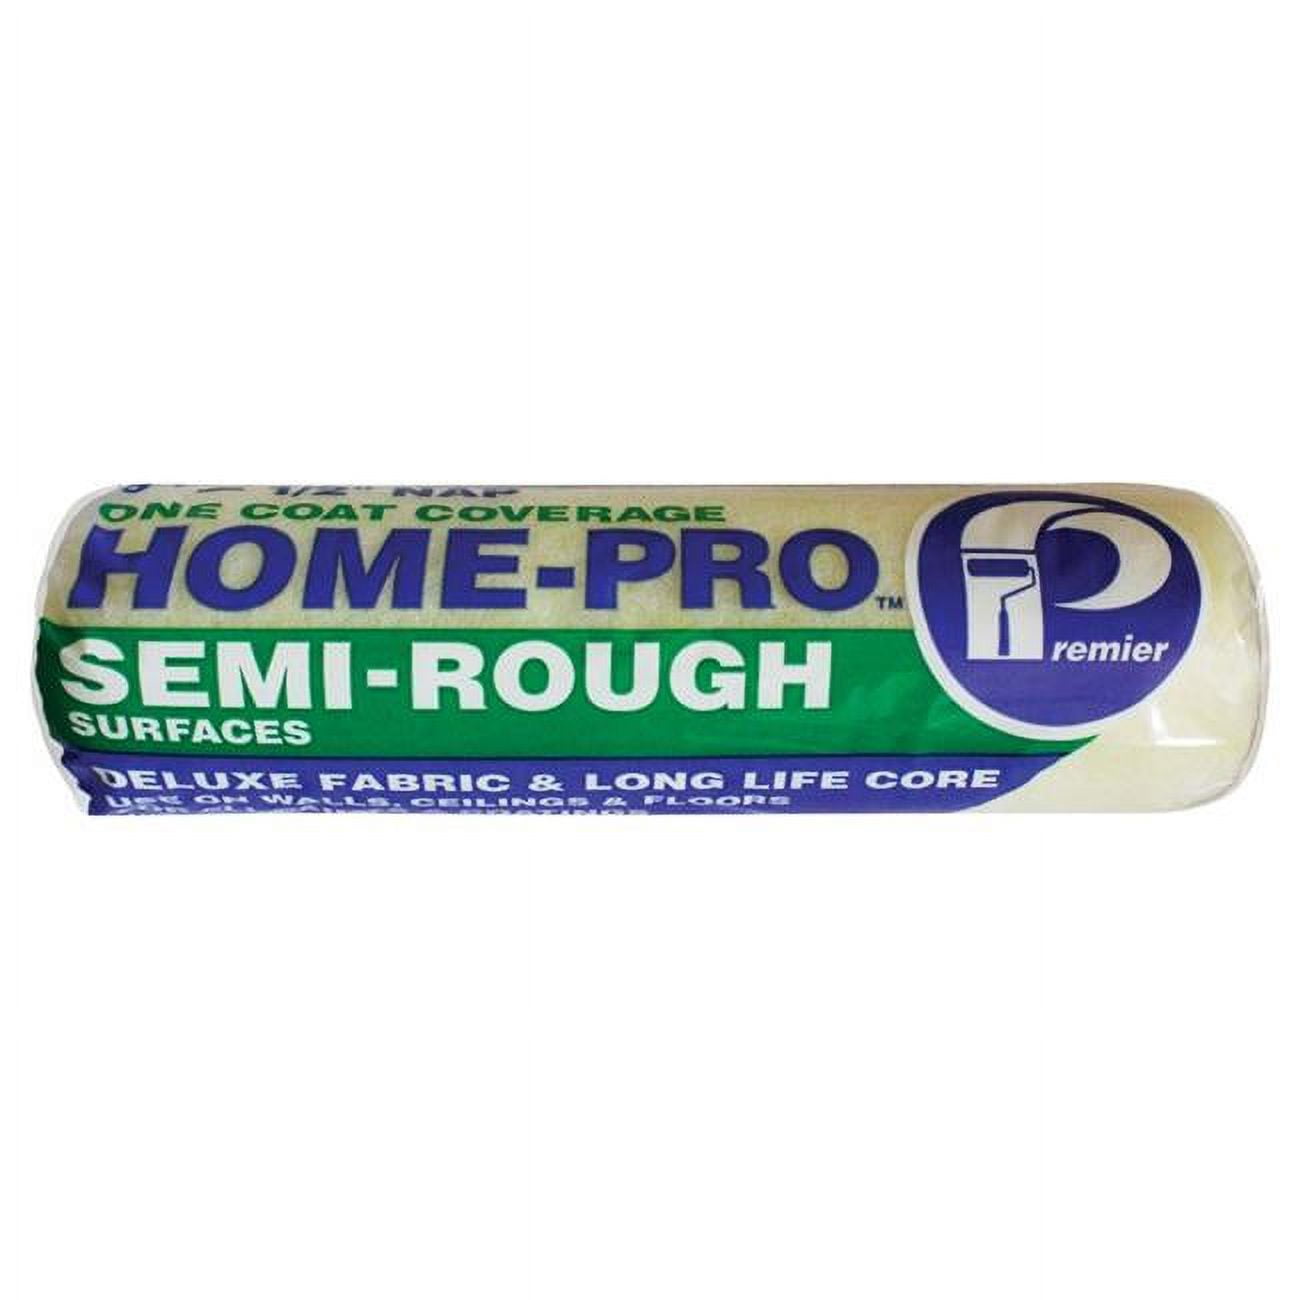 1898832 Home-pro Polyester 0.5 X 9 In. Paint Roller Cover For Semi-rough, Melon - Case Of 36